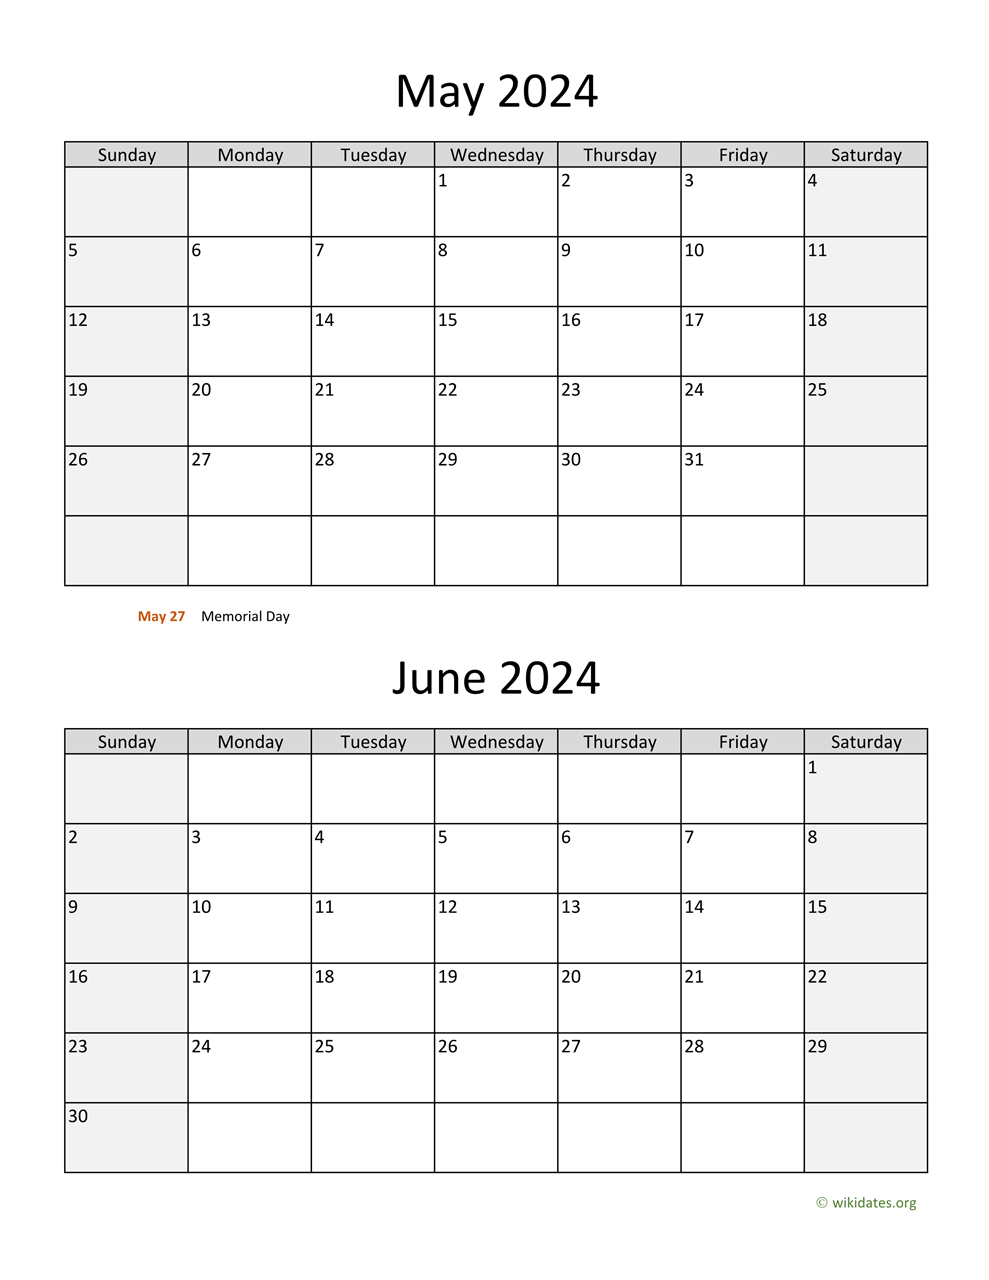 May And June 2024 Calendar | Wikidates for Printable 3 Month Calendar 2024 May June July